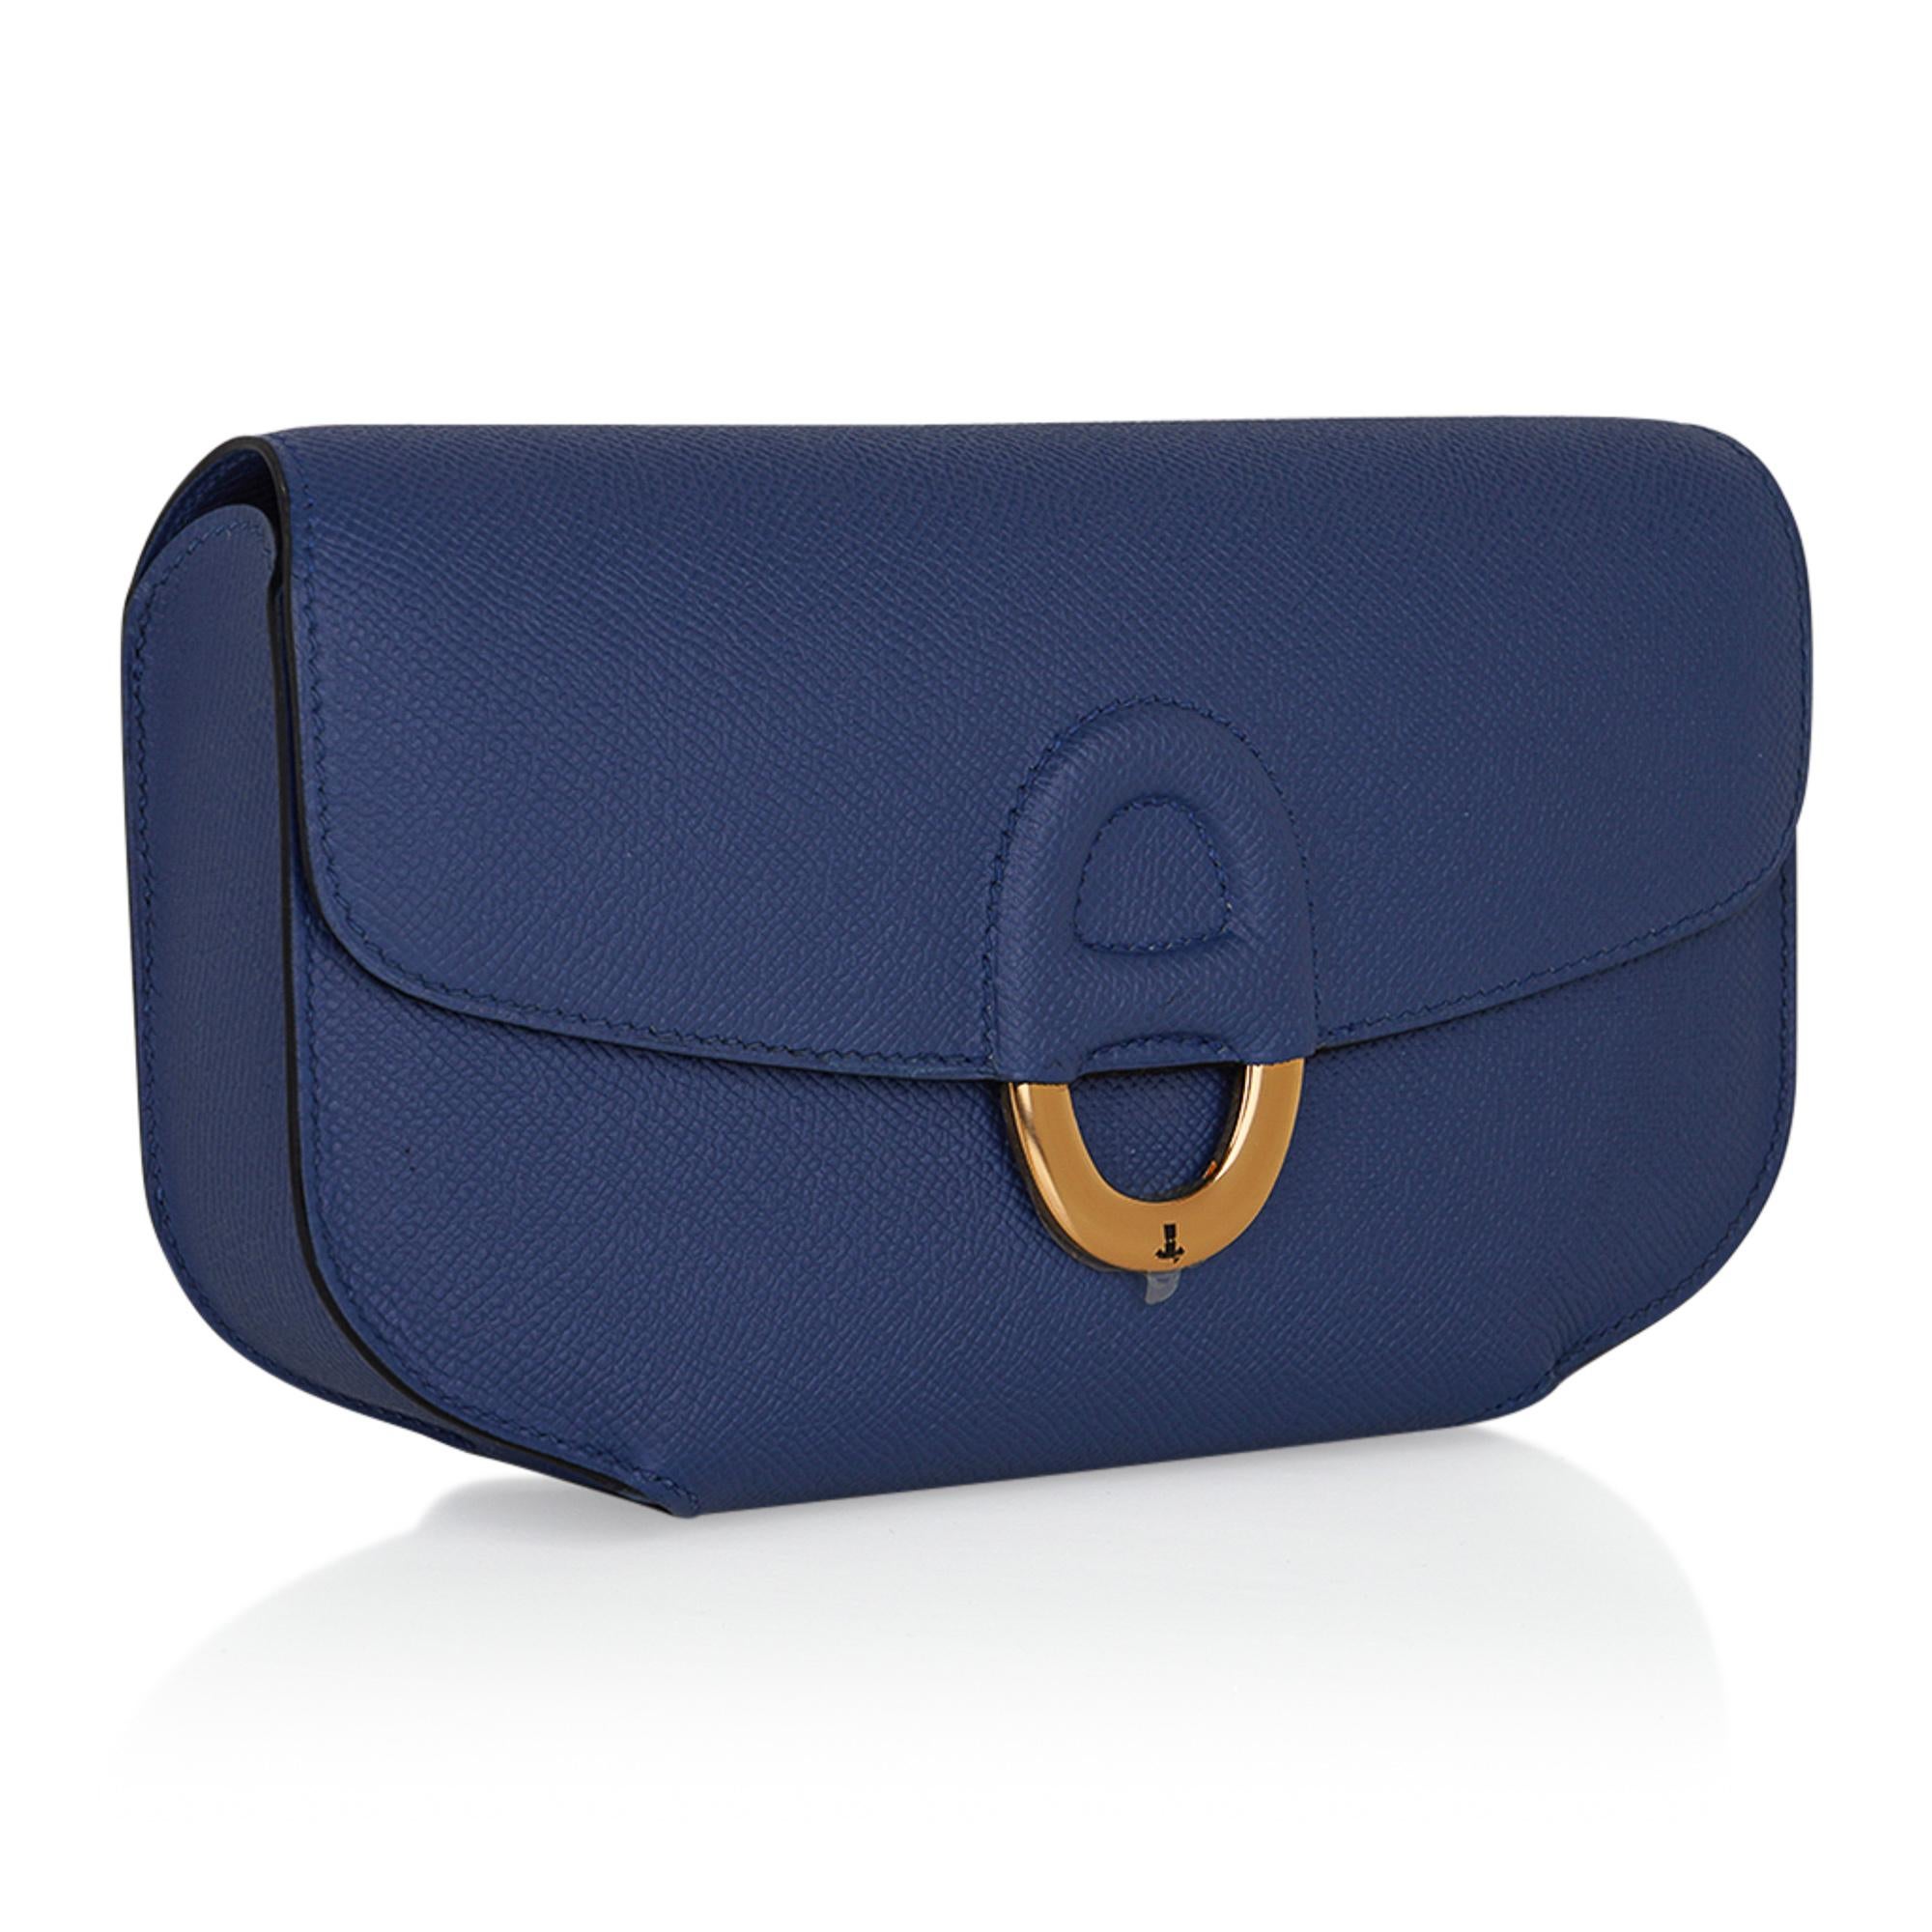 Mightychic offers a limited edition Hermes Cherche Midi 22 Clutch bag featured in Bleu Agate.
Classic Hermes chaine d'ancre clasp.
Epsom leather and Gold Hardware.
2 interior slot pockets.
Subtle elegance and unmistakably Hermes!
Comes with sleeper